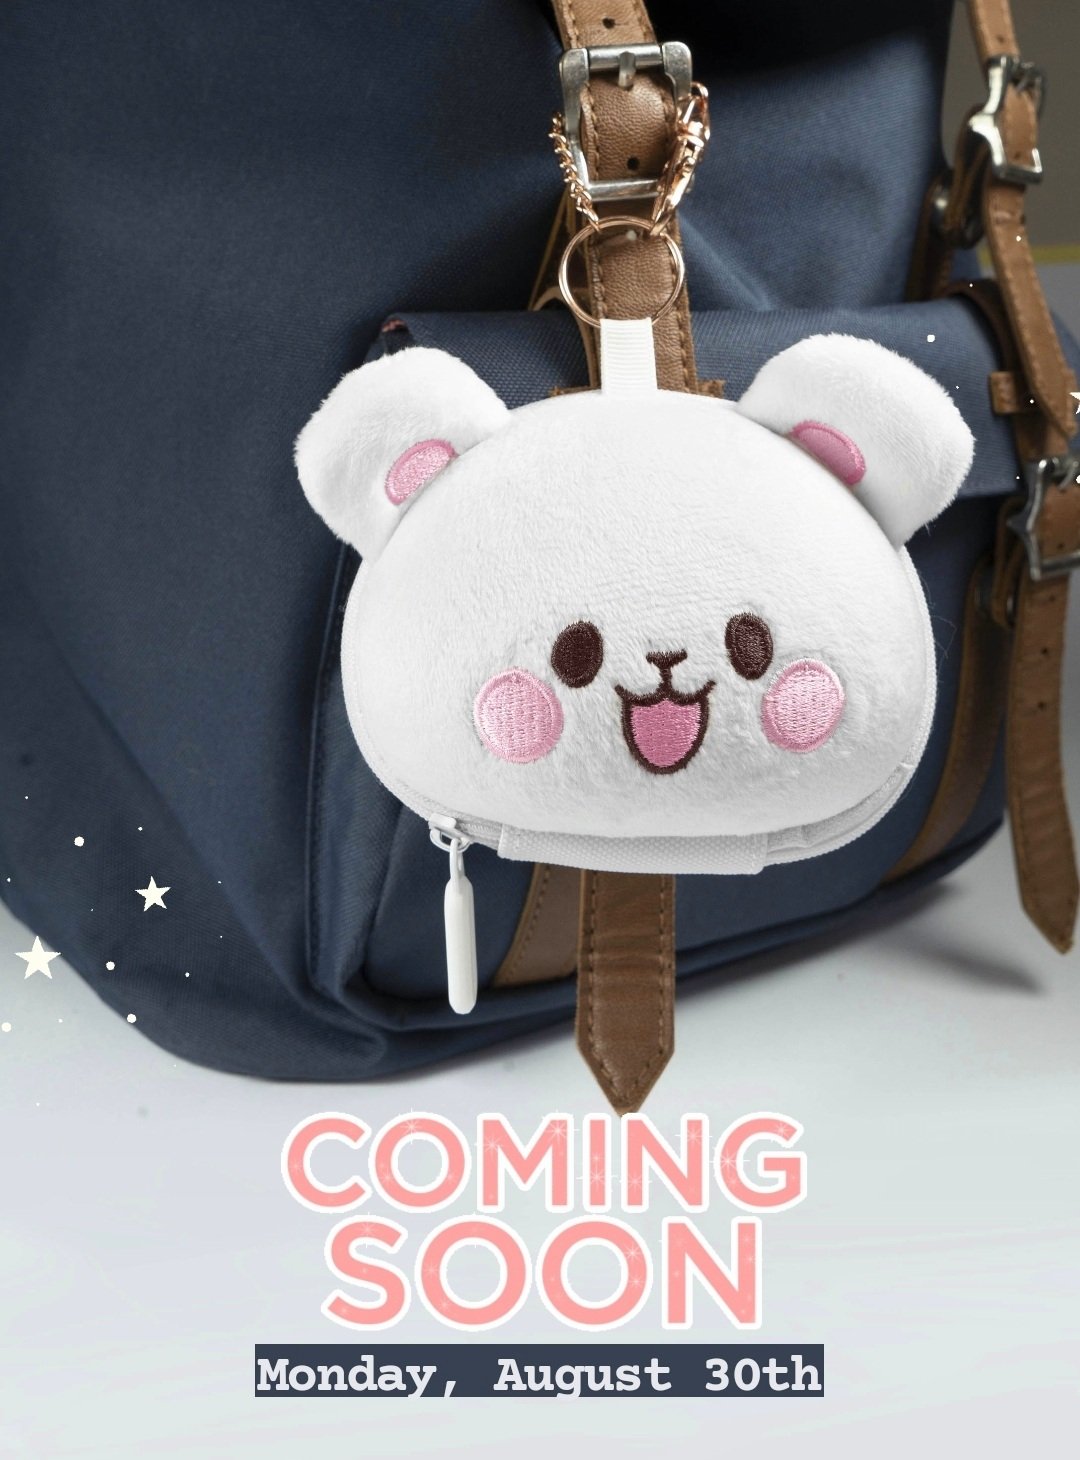 Milk & Mocha on X: "Milk accessories purse will a cute companion for your bags~! ❤❤ Coming soon, Monday August 30th~ International shipping be available 🌍 Pls stay tuned! 💕